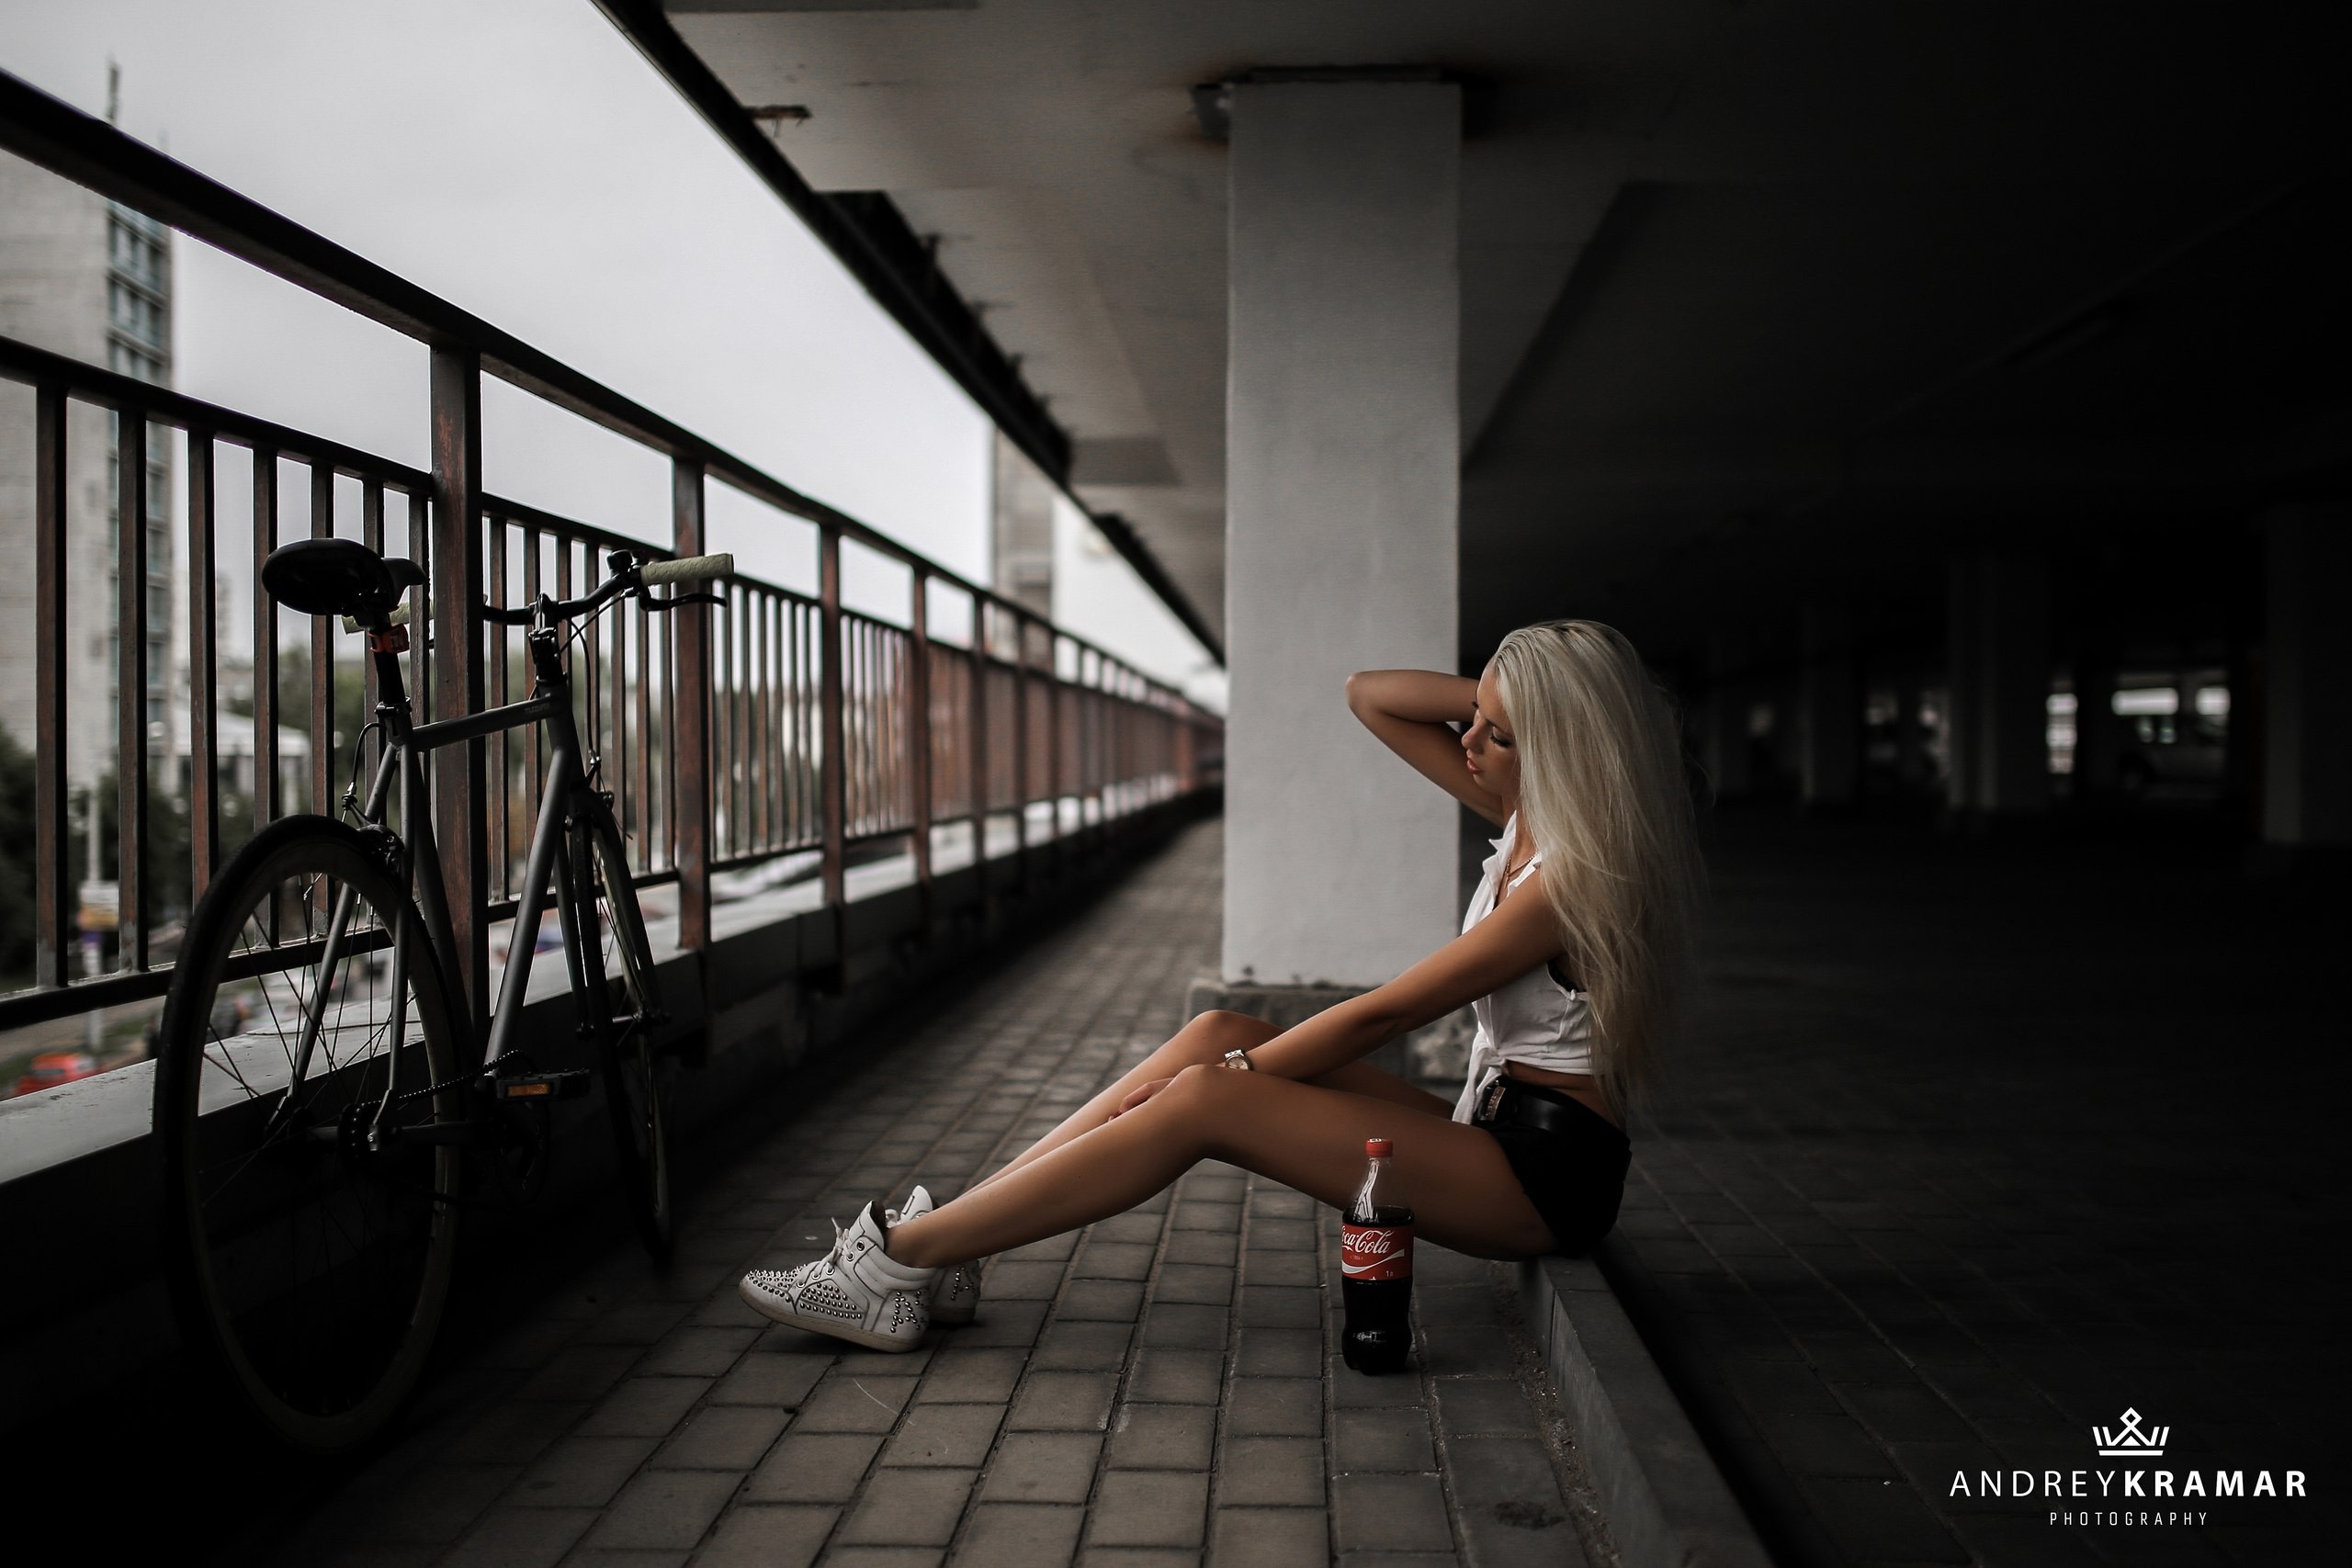 People 2560x1707 women model blonde sneakers jean shorts bottles Coca-Cola hands on head T-shirt Andrey Kramar long hair women with bicycles urban women outdoors vehicle dyed hair sitting white shoes watermarked looking away slim body bicycle